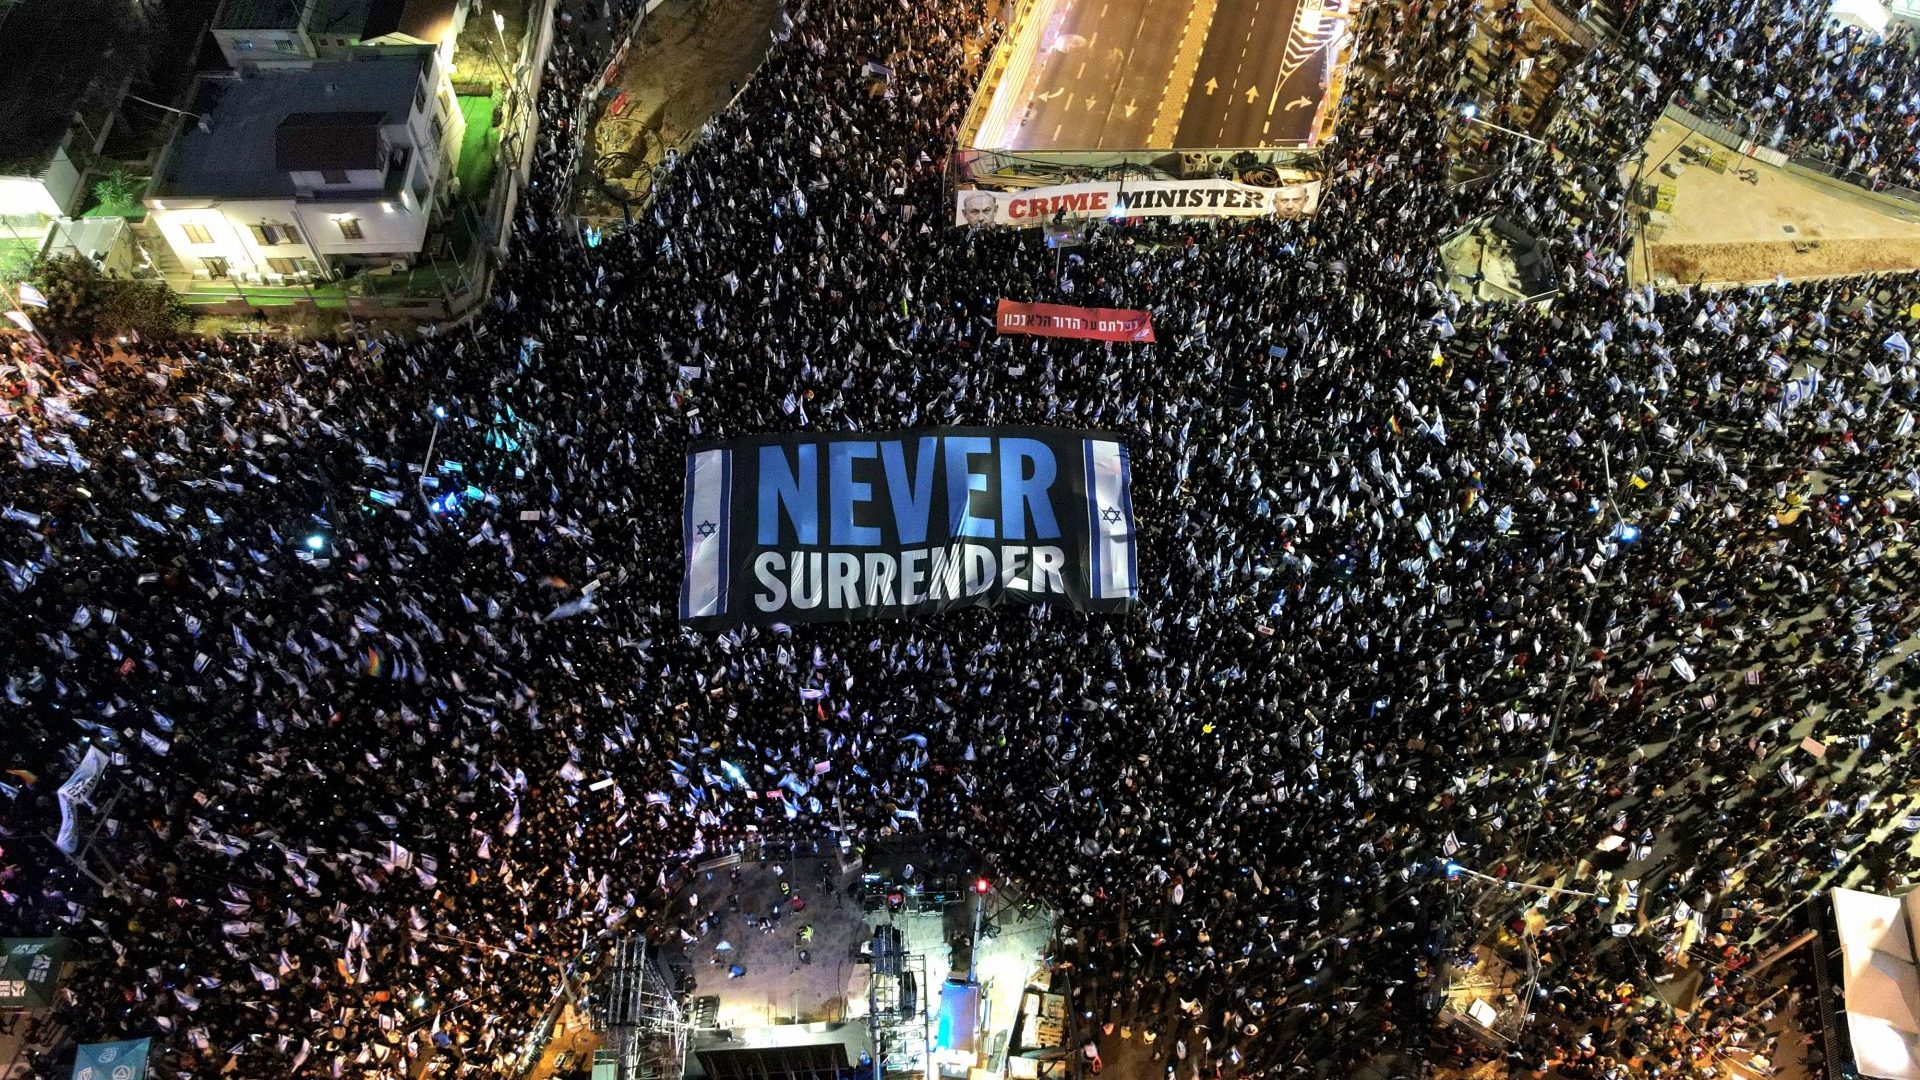  An aerial view of the area as anti-Netenyahu protestors gather during protests continue against Israeli Prime Minister Binyamin Netanyahu's government's regulations restricting the powers of the judiciary in Rehovot, Israel. Photo: Amir Goldstein/Anadolu Agency via Getty Images